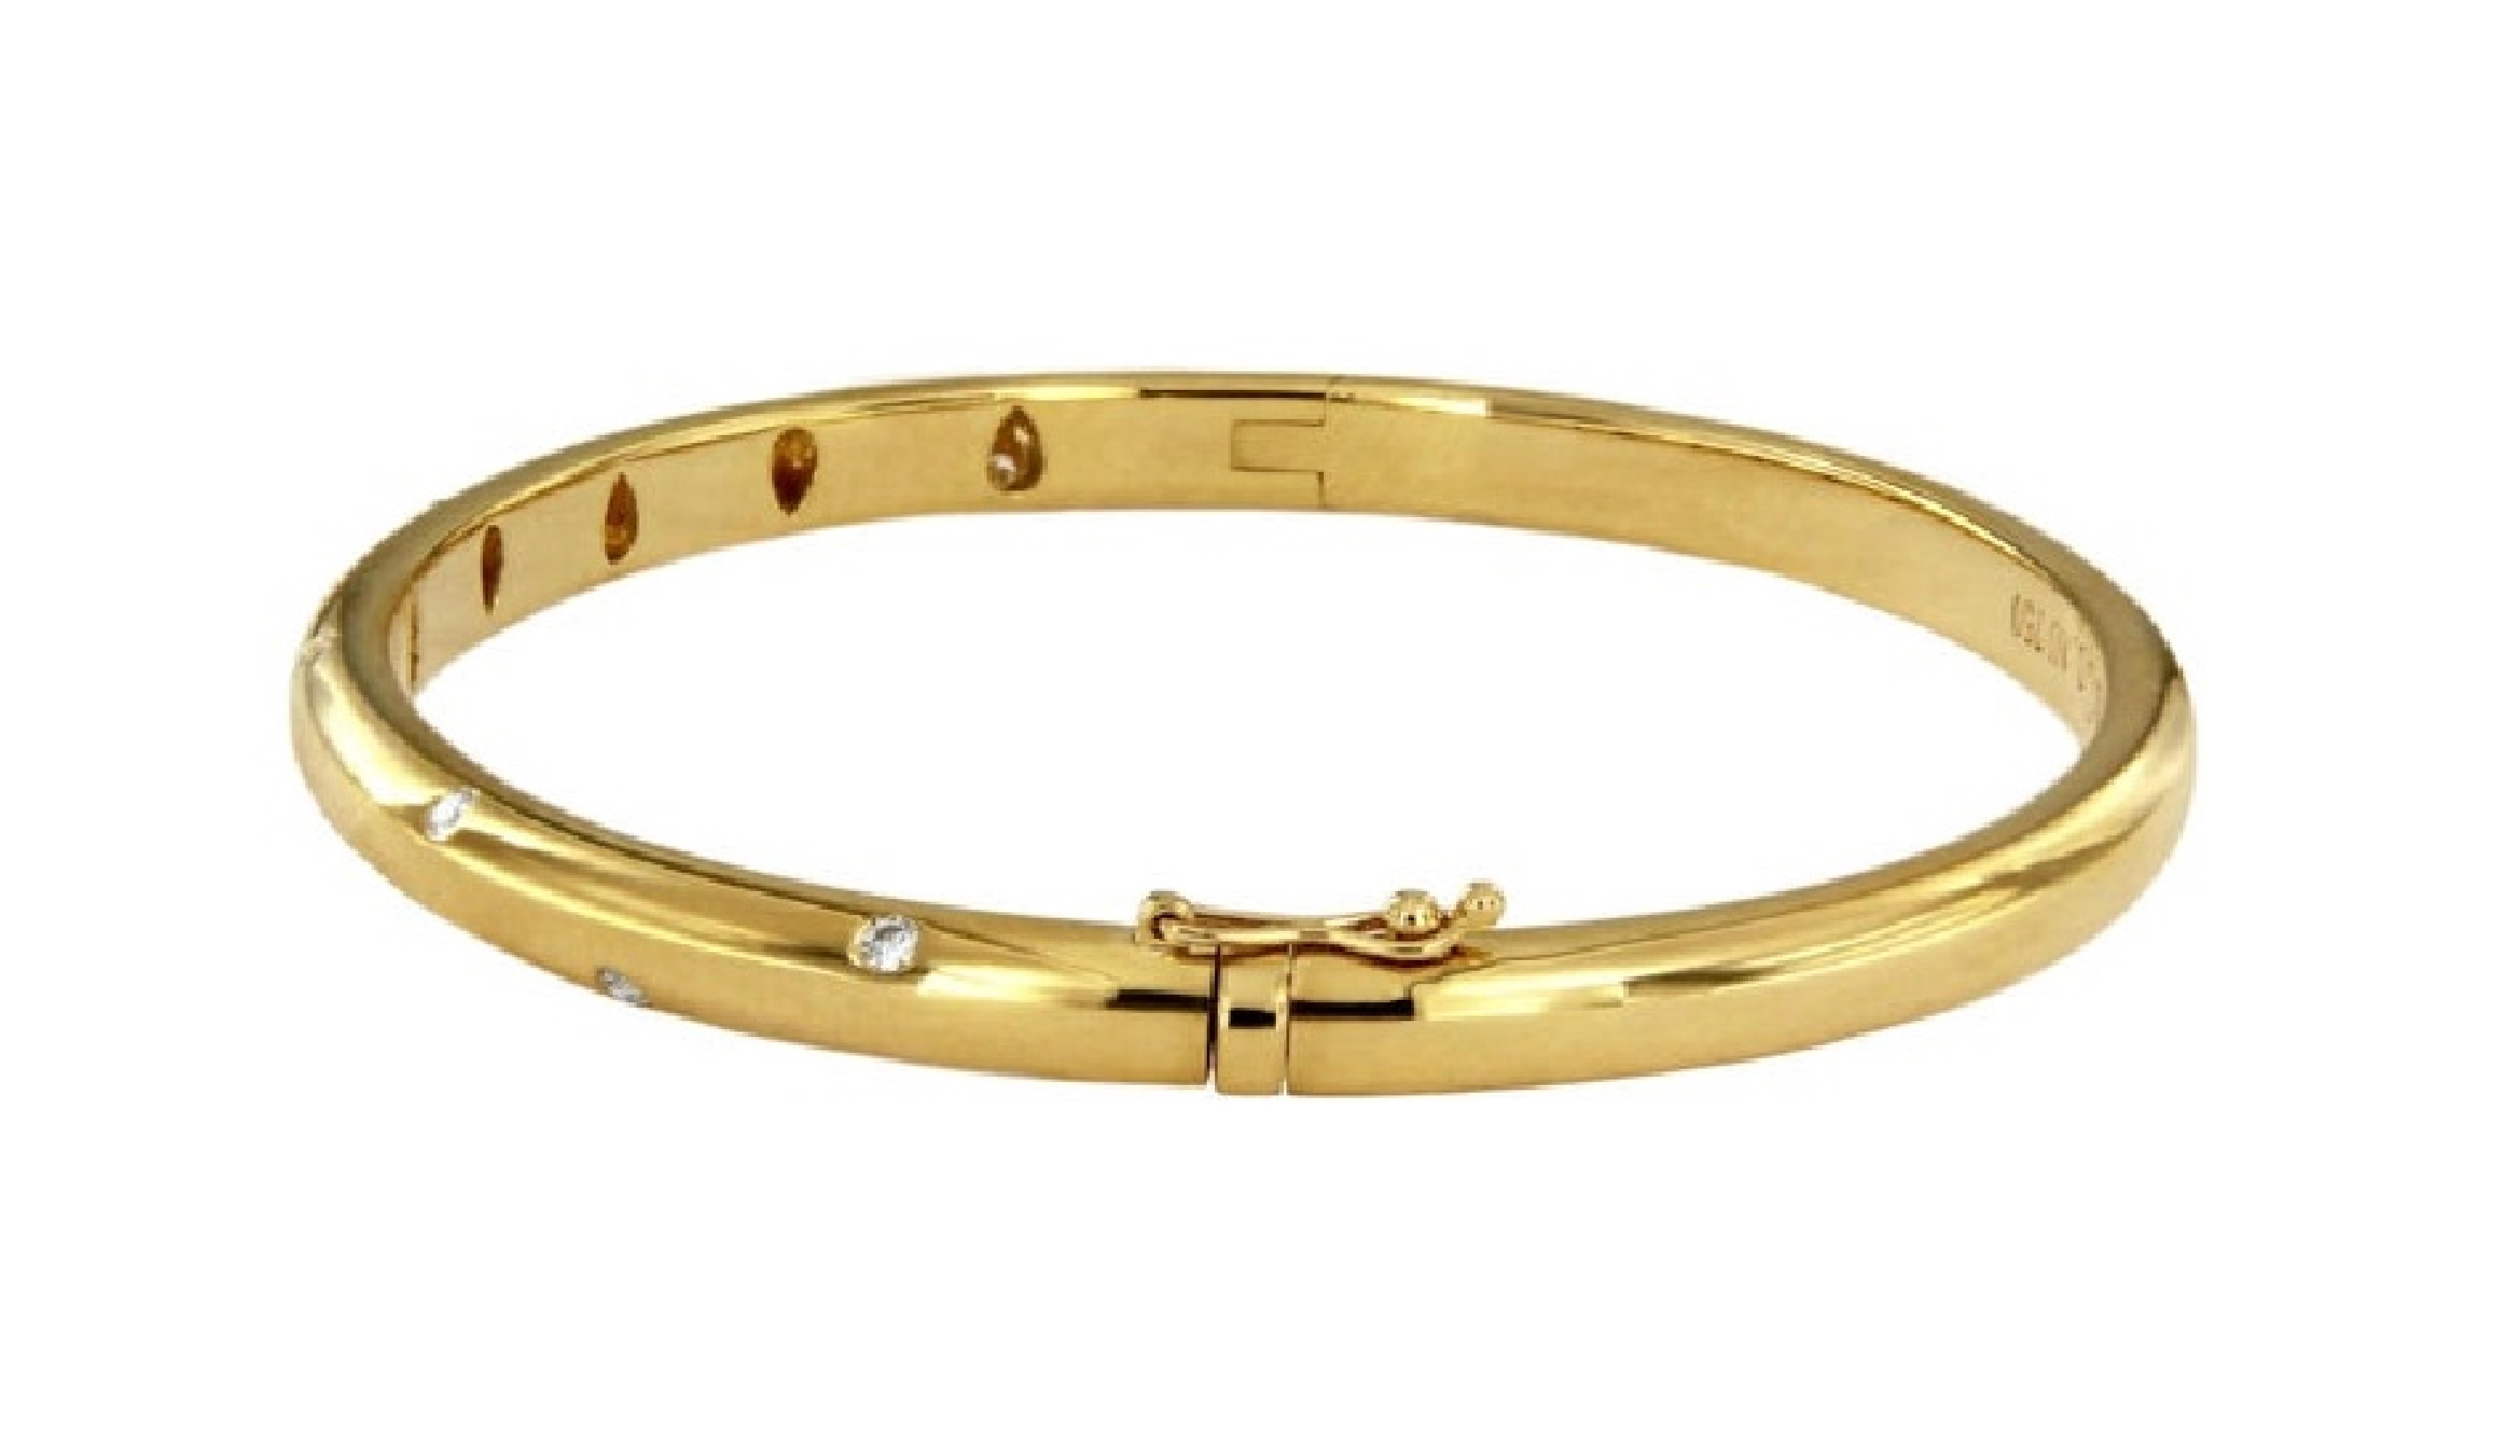 *Mint condition
-18k gold with round brilliant diamonds
-Carat total weight .21
-Width: 4.5mm
-Outer circumference: 7.2”
-Fits wrists up to 6.25